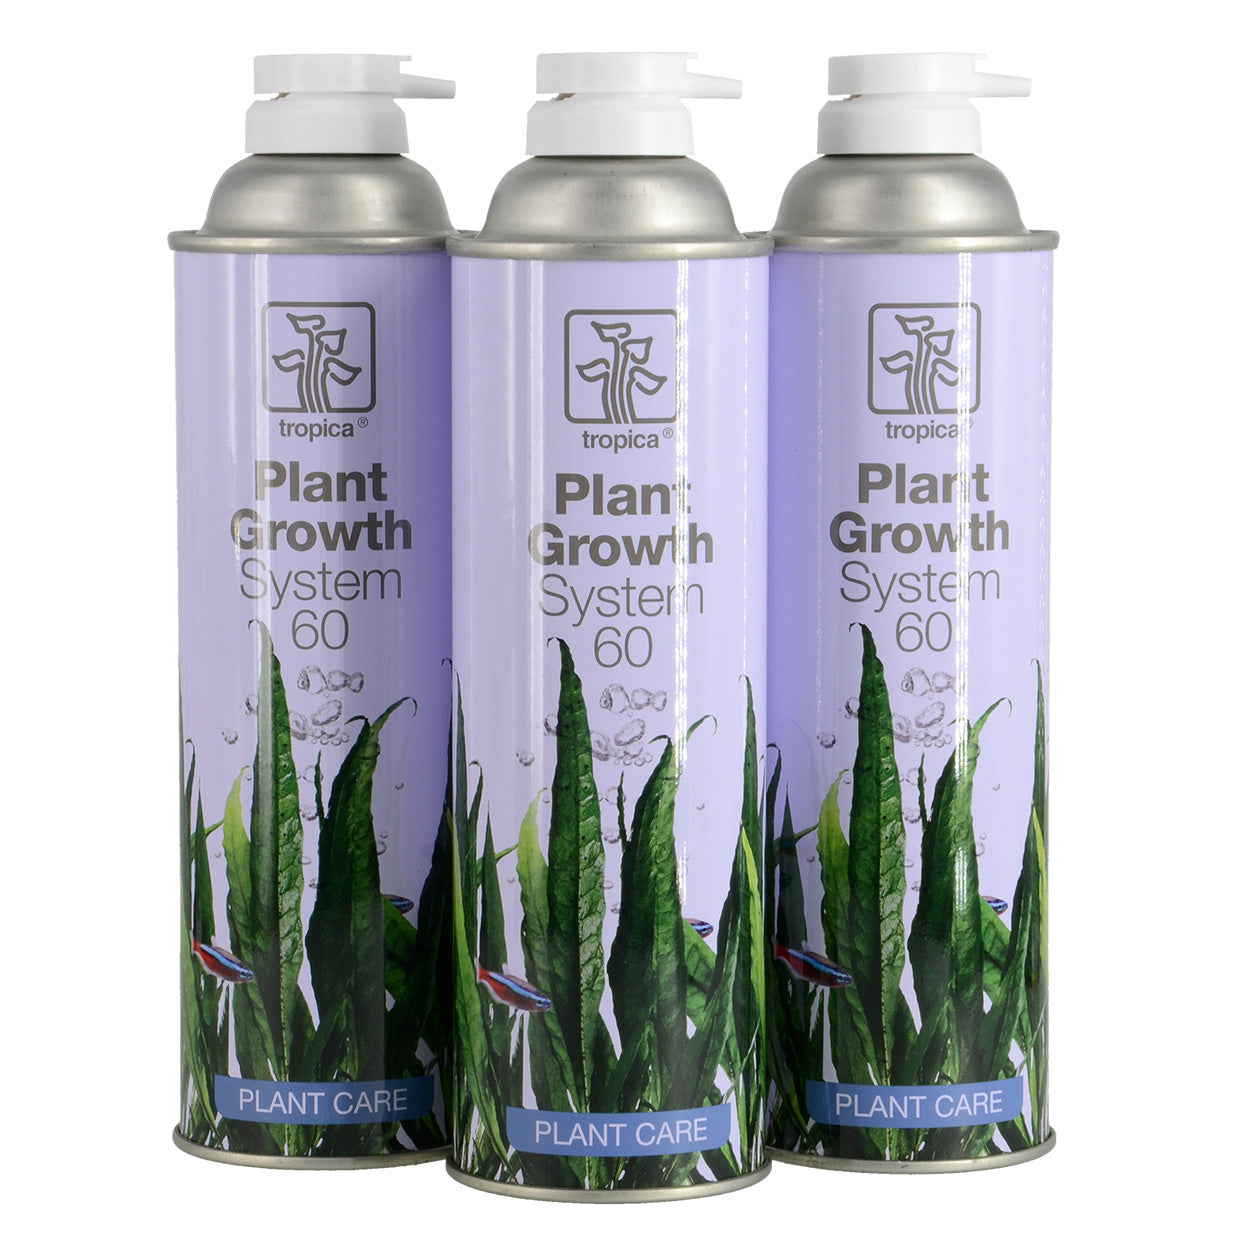 Tropica Plant Growth System 60 Refills - 3 pack